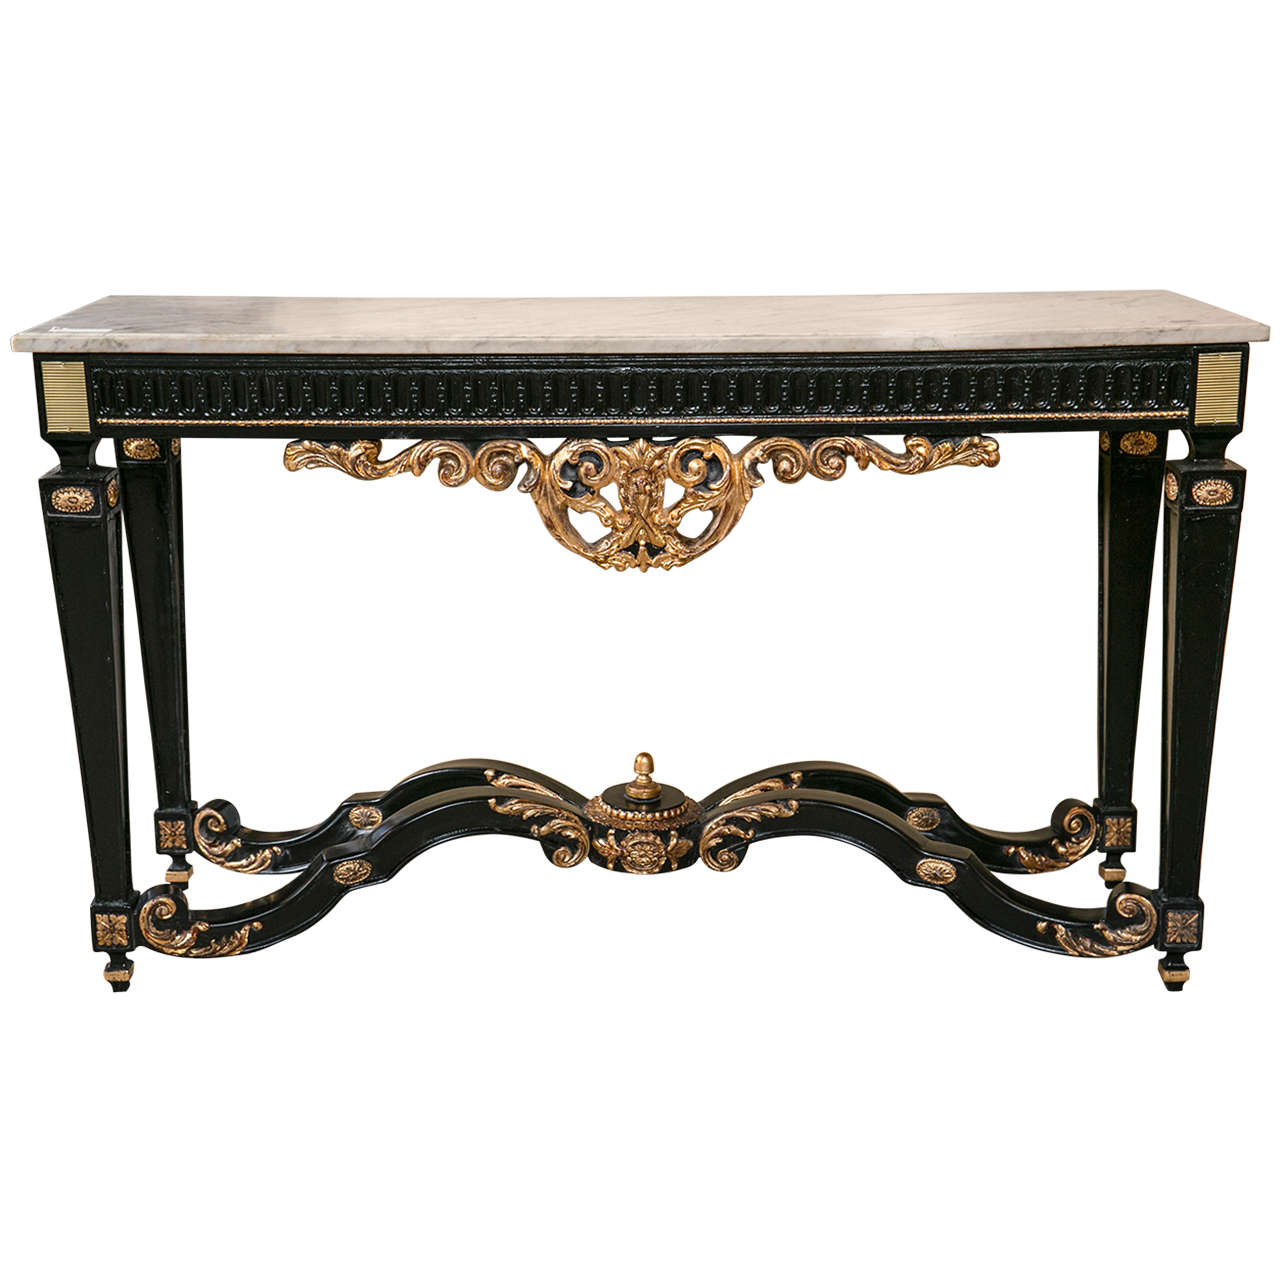 French Rococo Style Ebonized Console Table